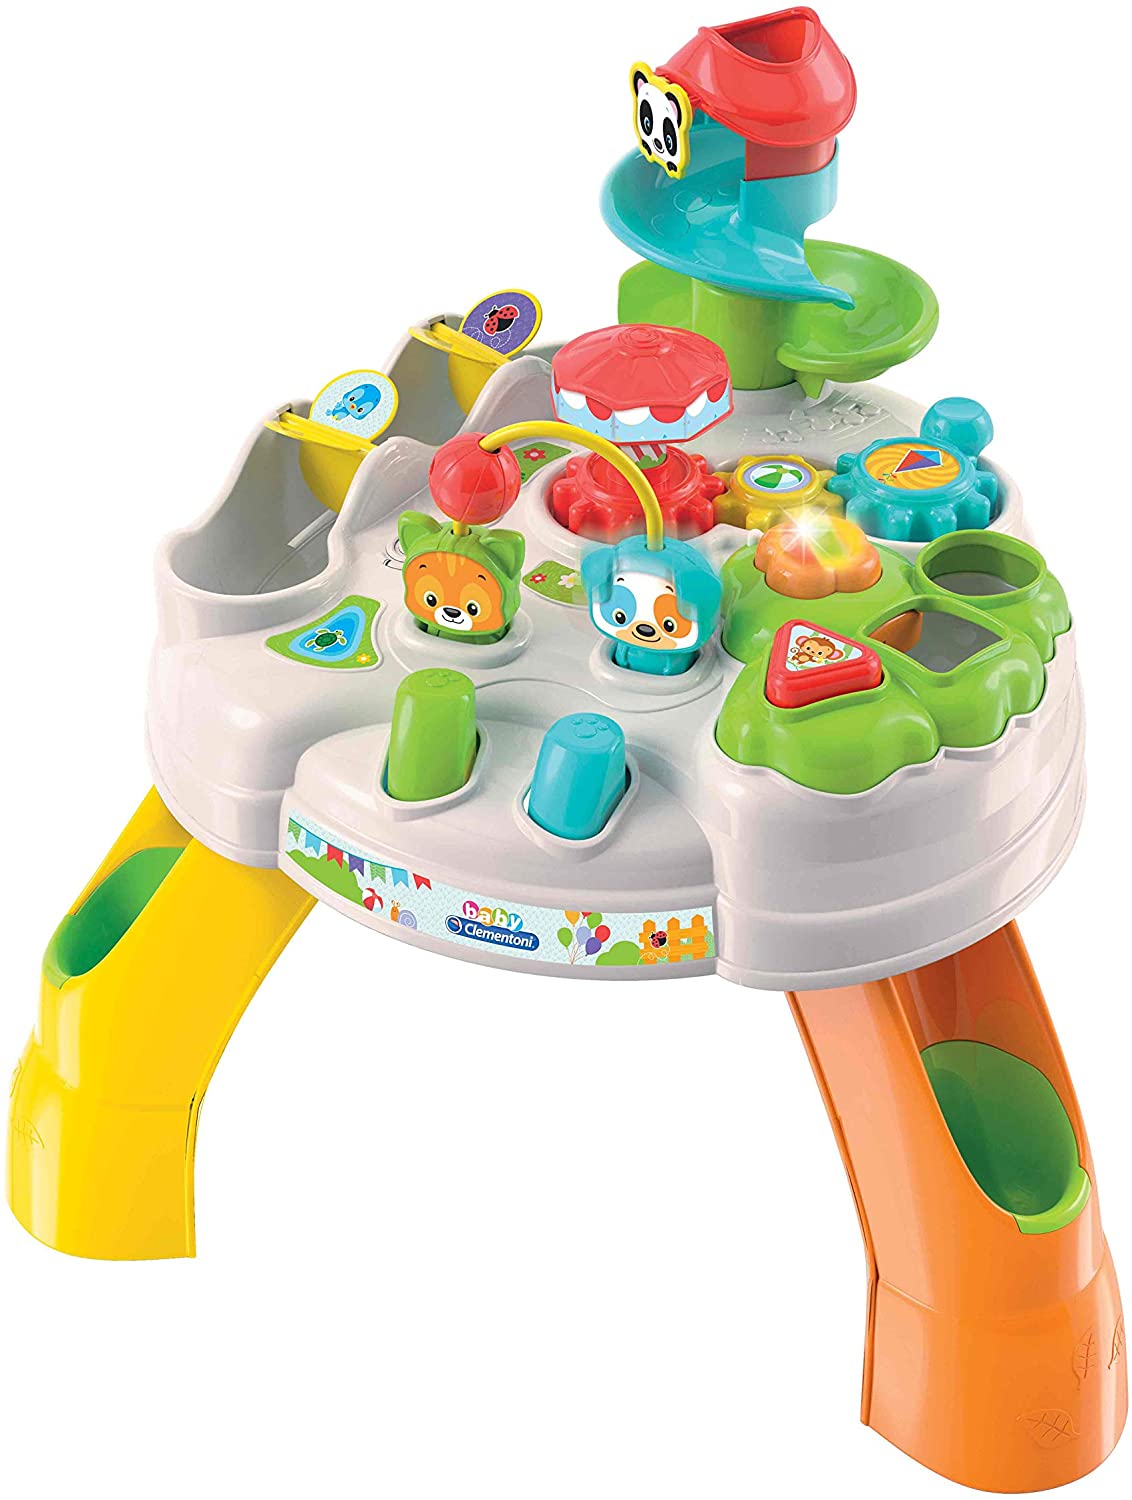 Clementoni Baby-Park 17300 Activity Table Colourful One Size